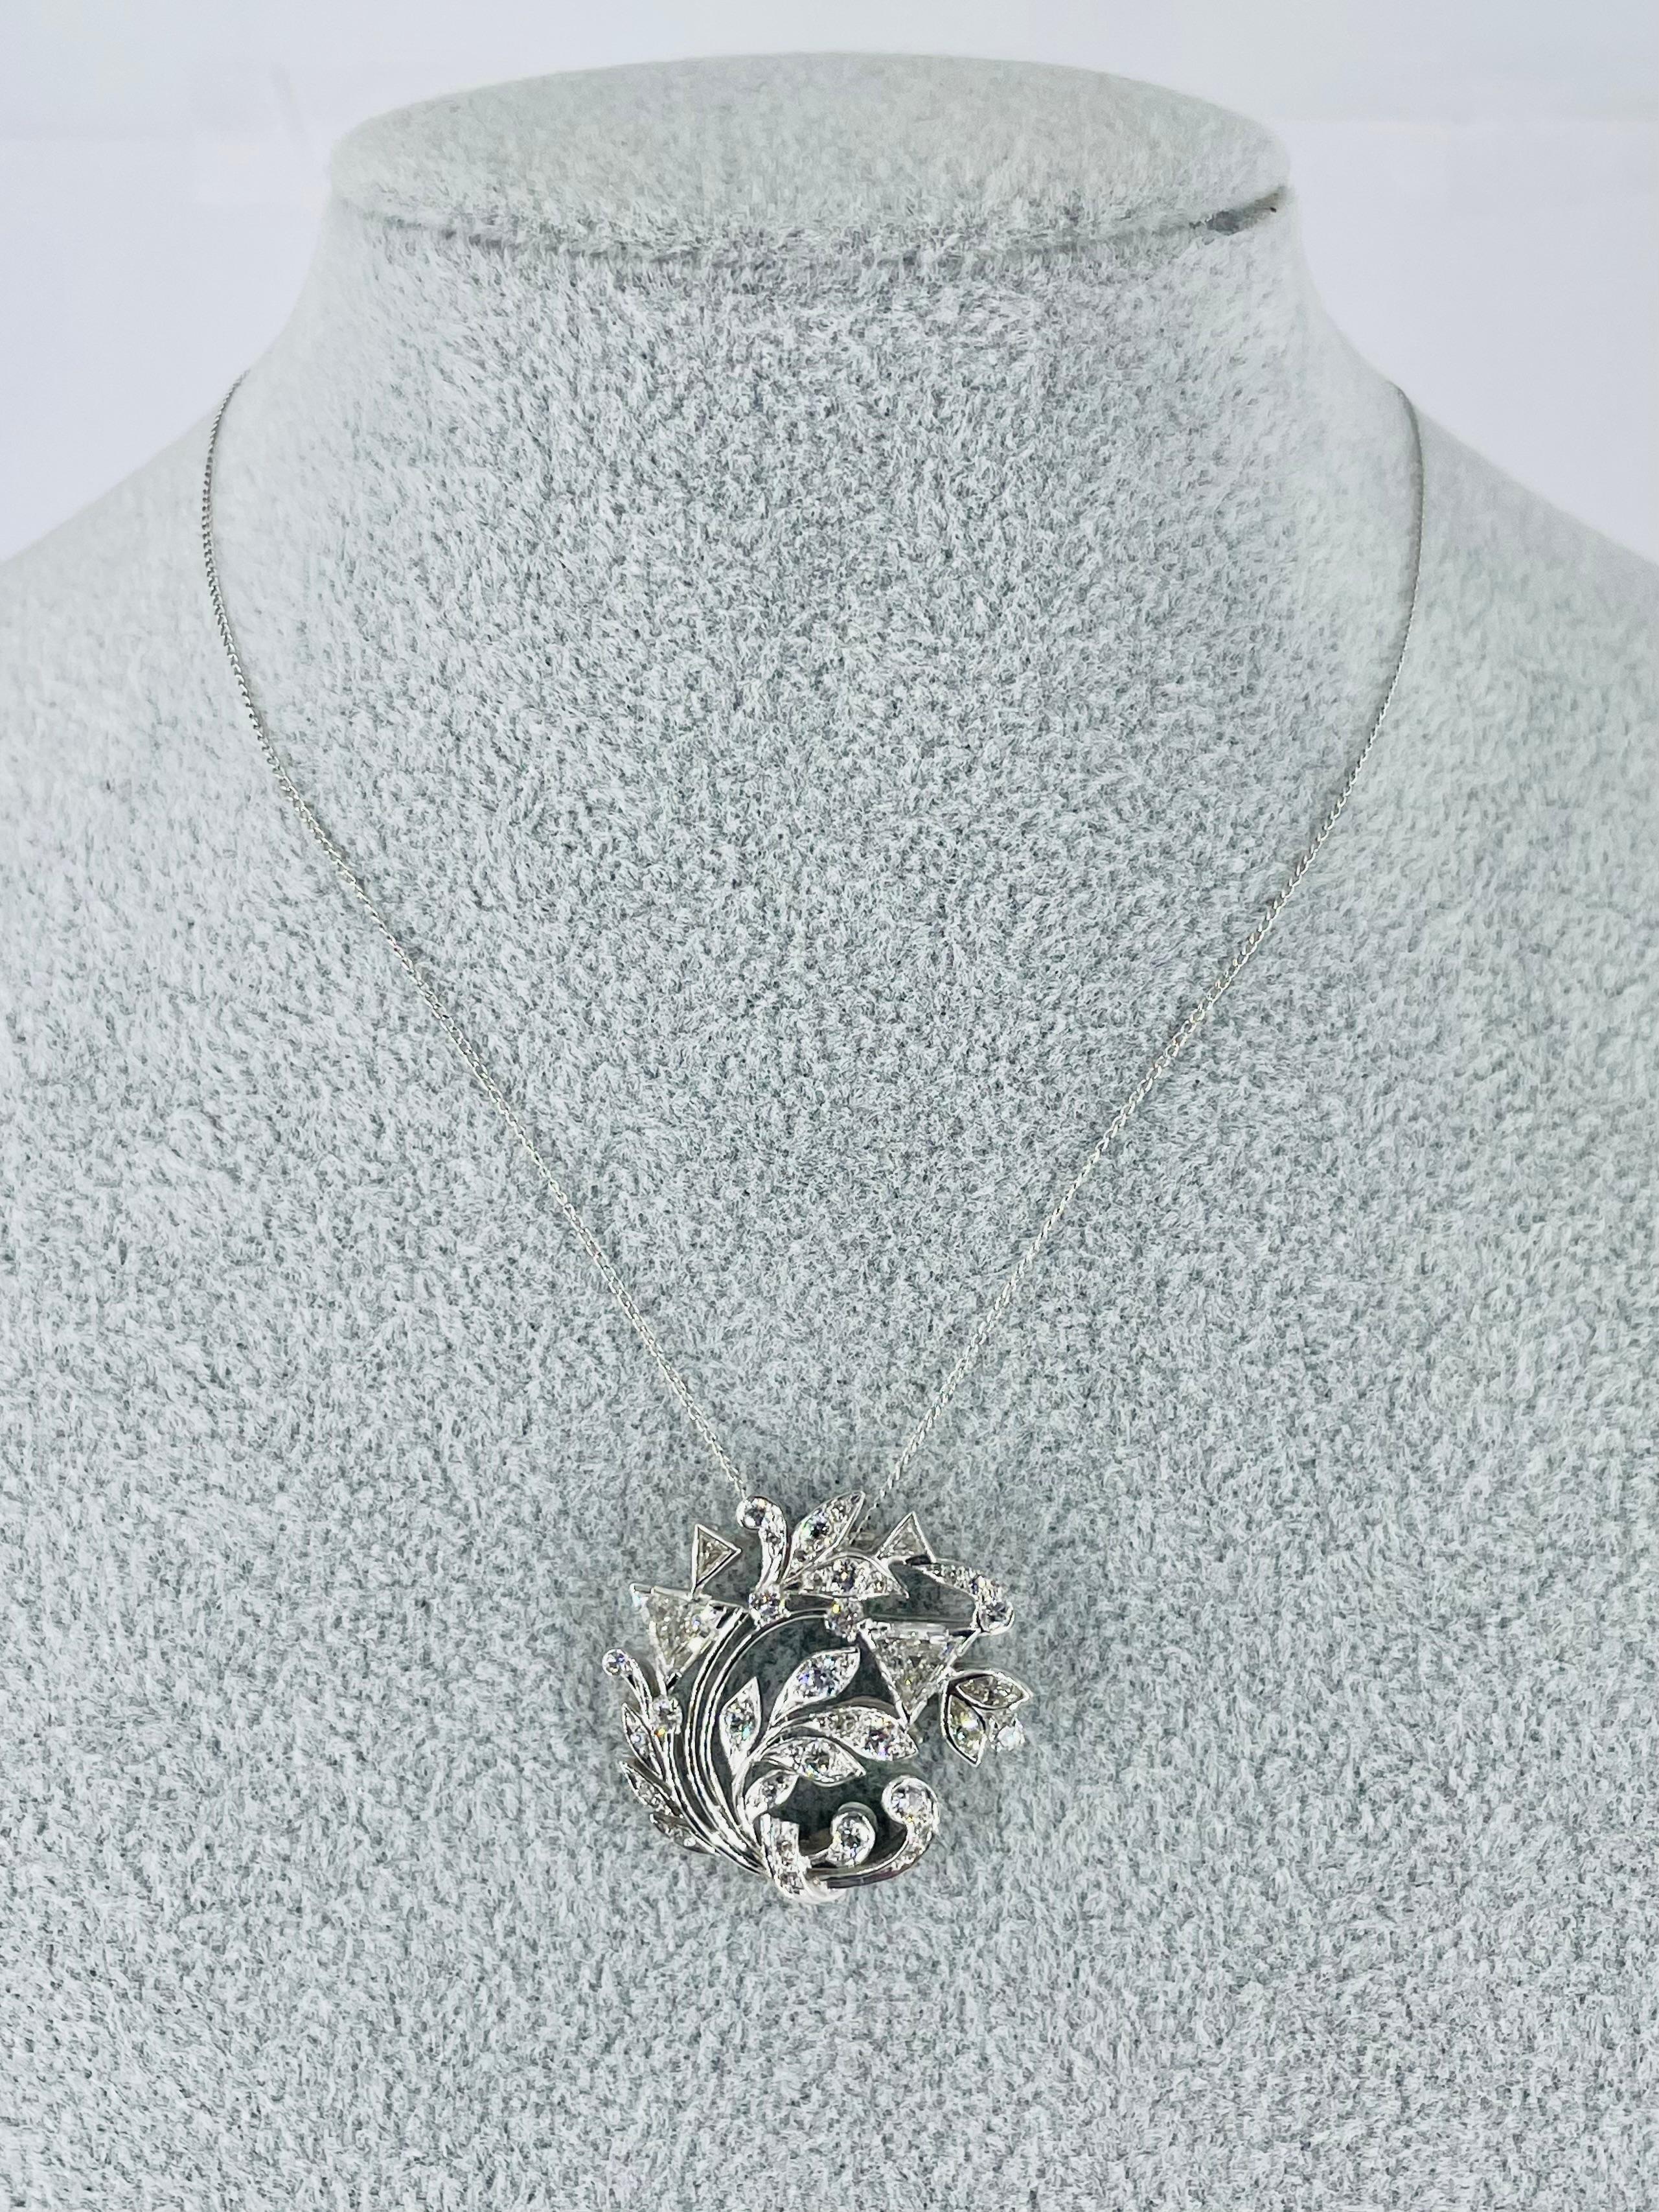 This 1950s pendant from the J. Birnbach vault is a glamourous, timeless piece. The asymmetrical vine design contains a variety of diamond cuts: two large triangle shape diamonds (1.25 carats), marquise, round and smaller triangle shapes. The total